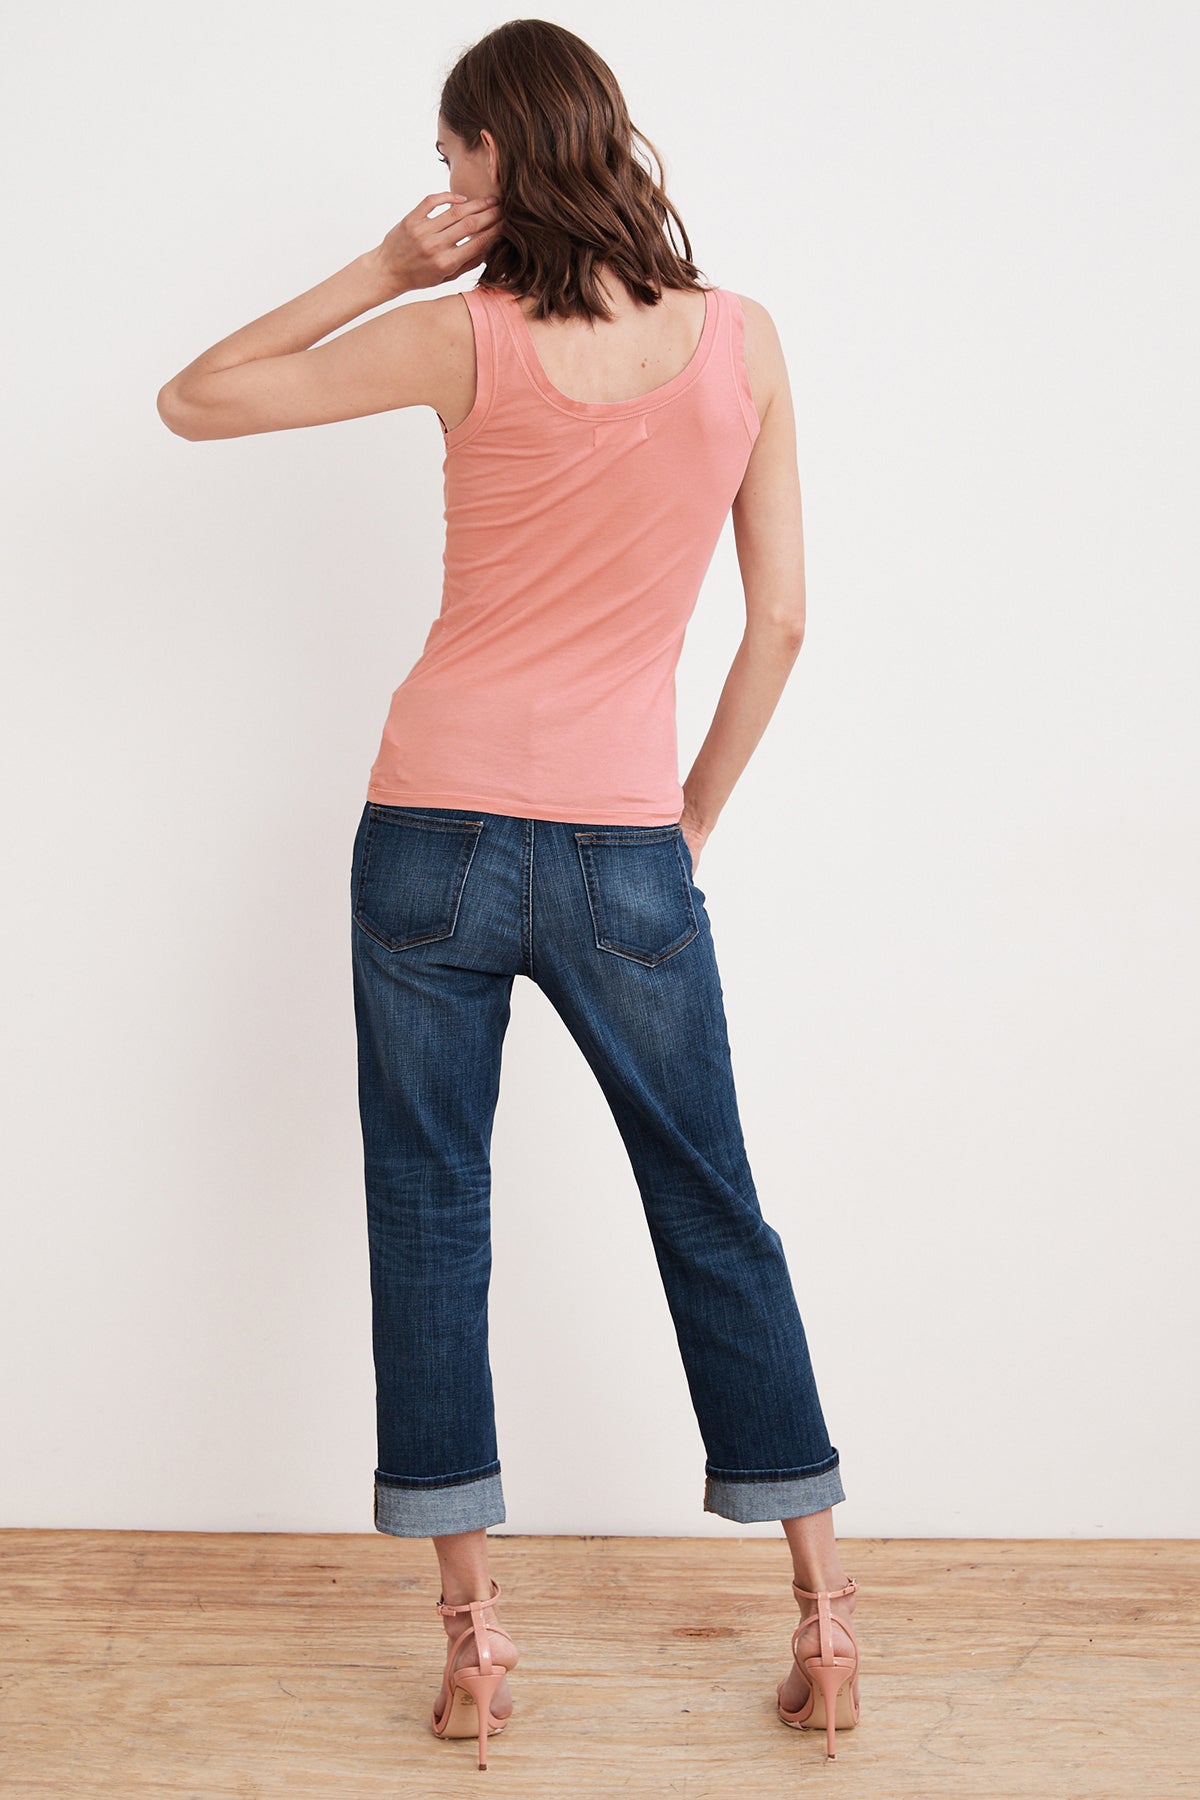   A woman wearing a MOSSY GAUZY WHISPER FITTED TANK in pink, perfect for warmer days paired with jeans for a trendy layering look by Velvet by Graham & Spencer. 